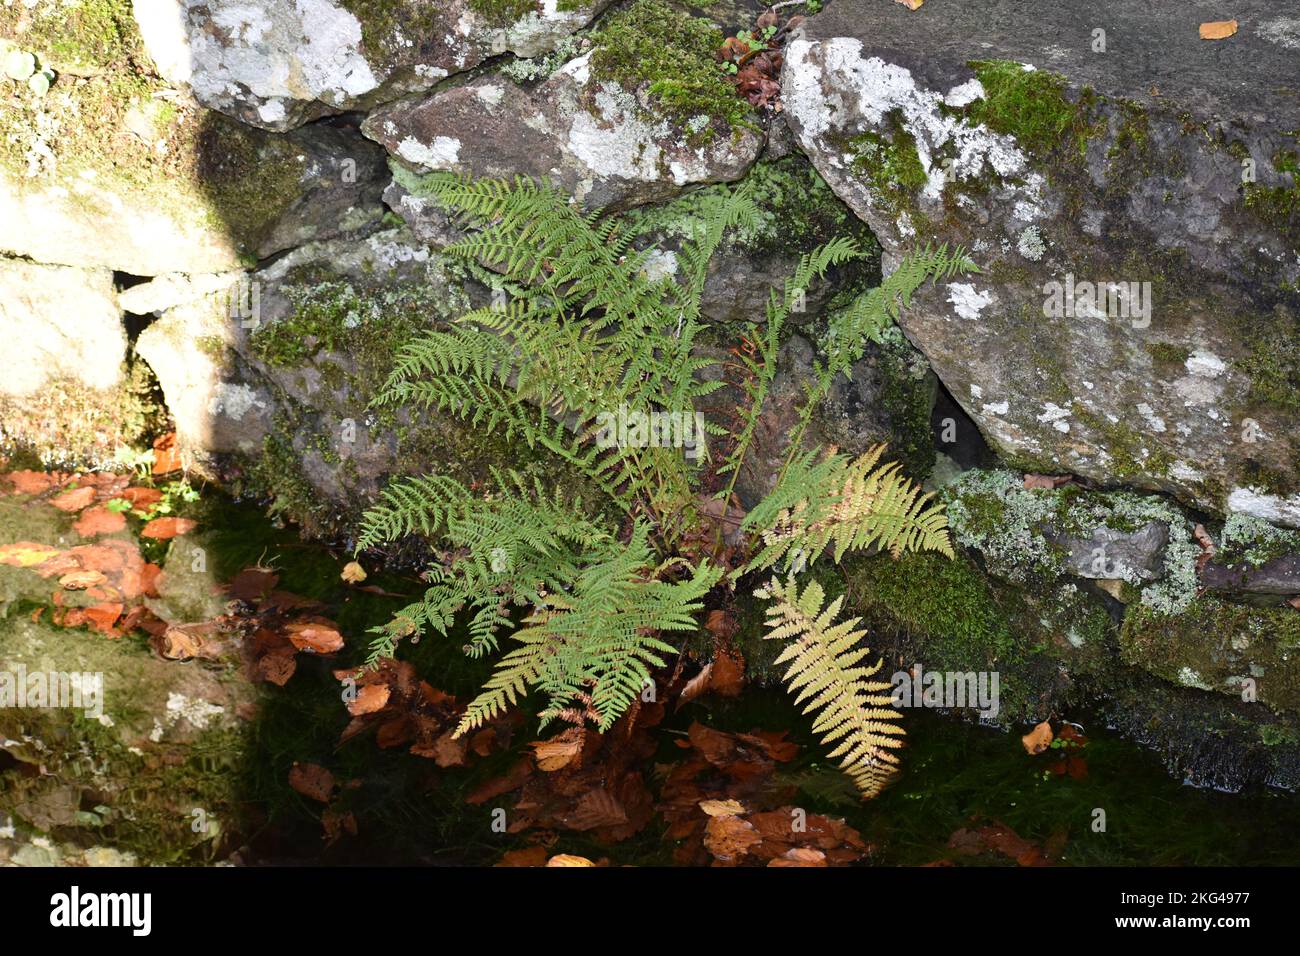 St Cybi's Holy Well, Llyn Peninsular, North Wales - Fern Growing In The Well Chamber Stock Photo